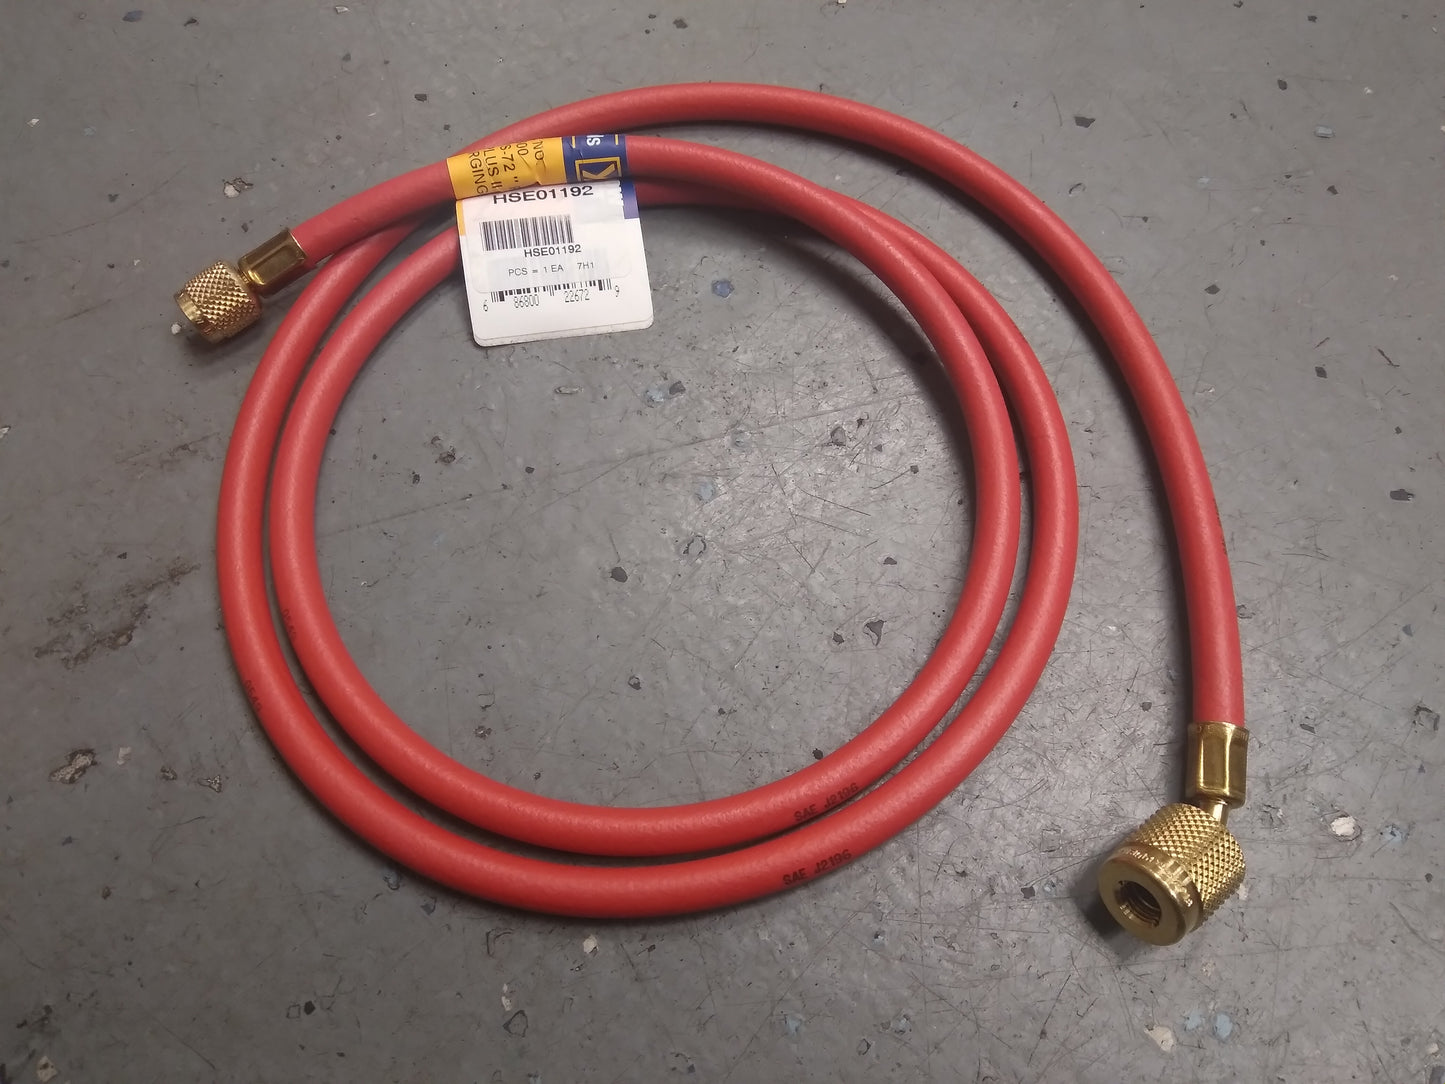 72" RED "PLUS II" 1/4" CHARGE HOSE